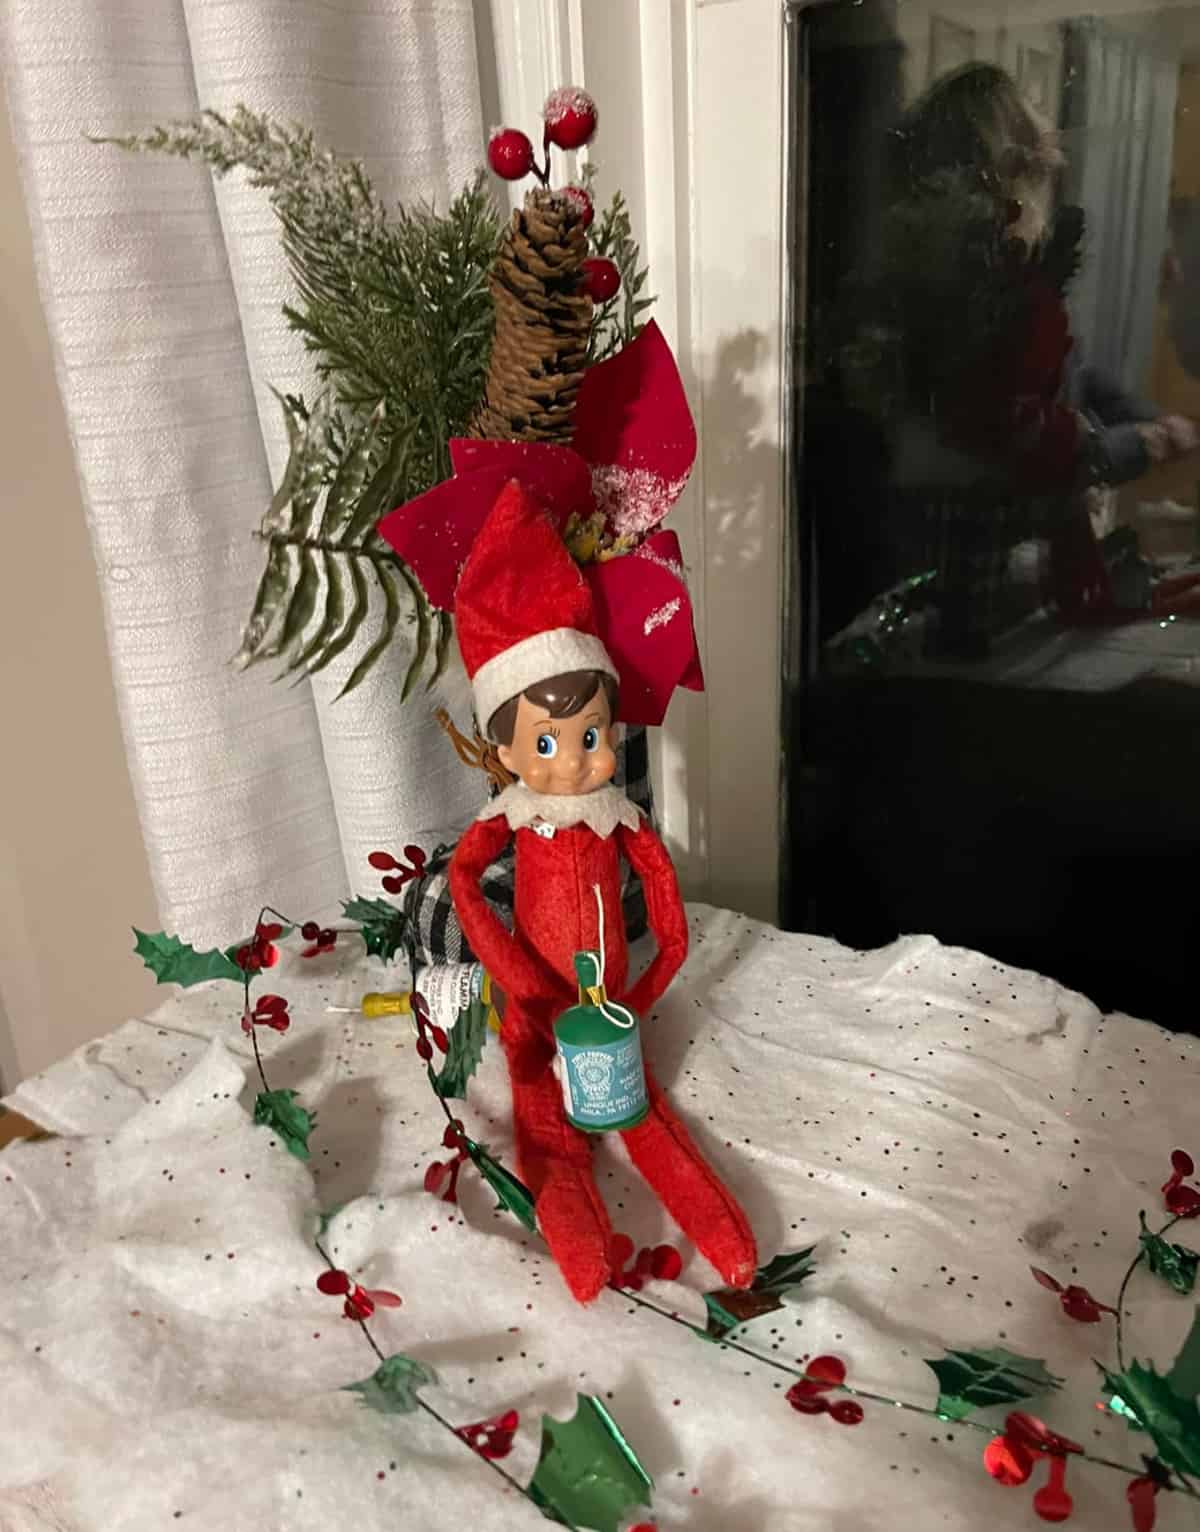 elf plays with Christmas decorations